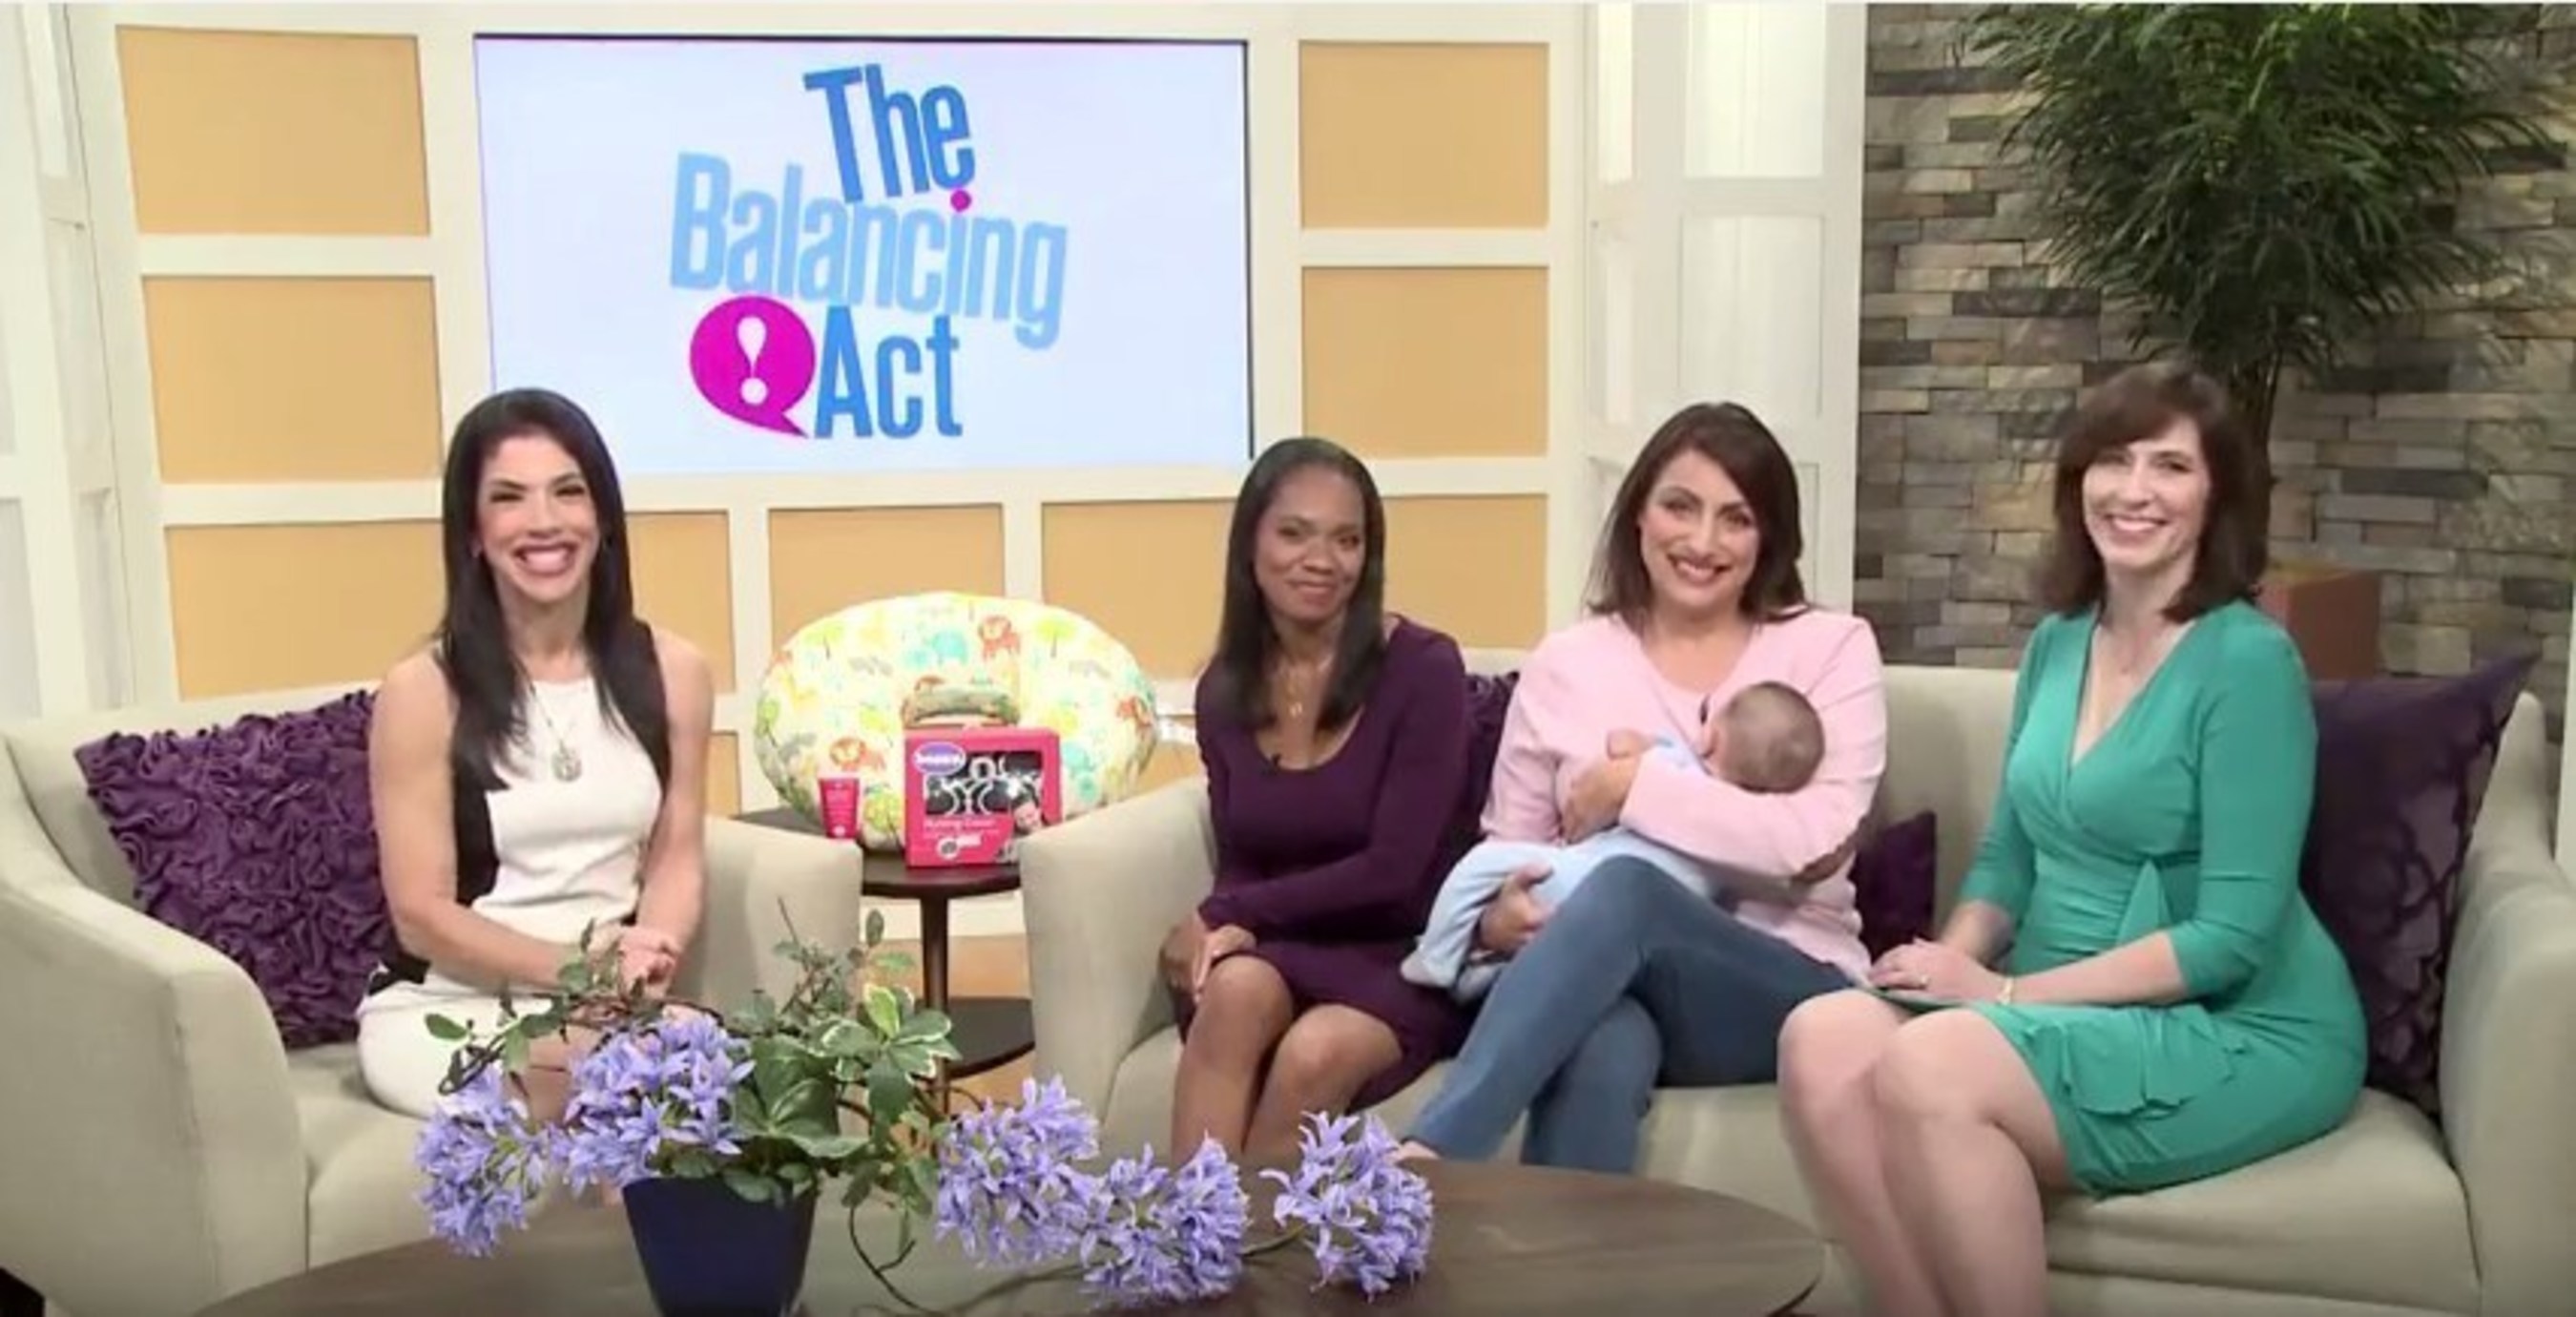 Lifetime Television(R) and The Boppy Company promote the importance of the breastfeeding journey. Tune into The Balancing Act airing on April 27th and May 4th at 7:30AM EDT for tips and information on a successful breastfeeding journey.